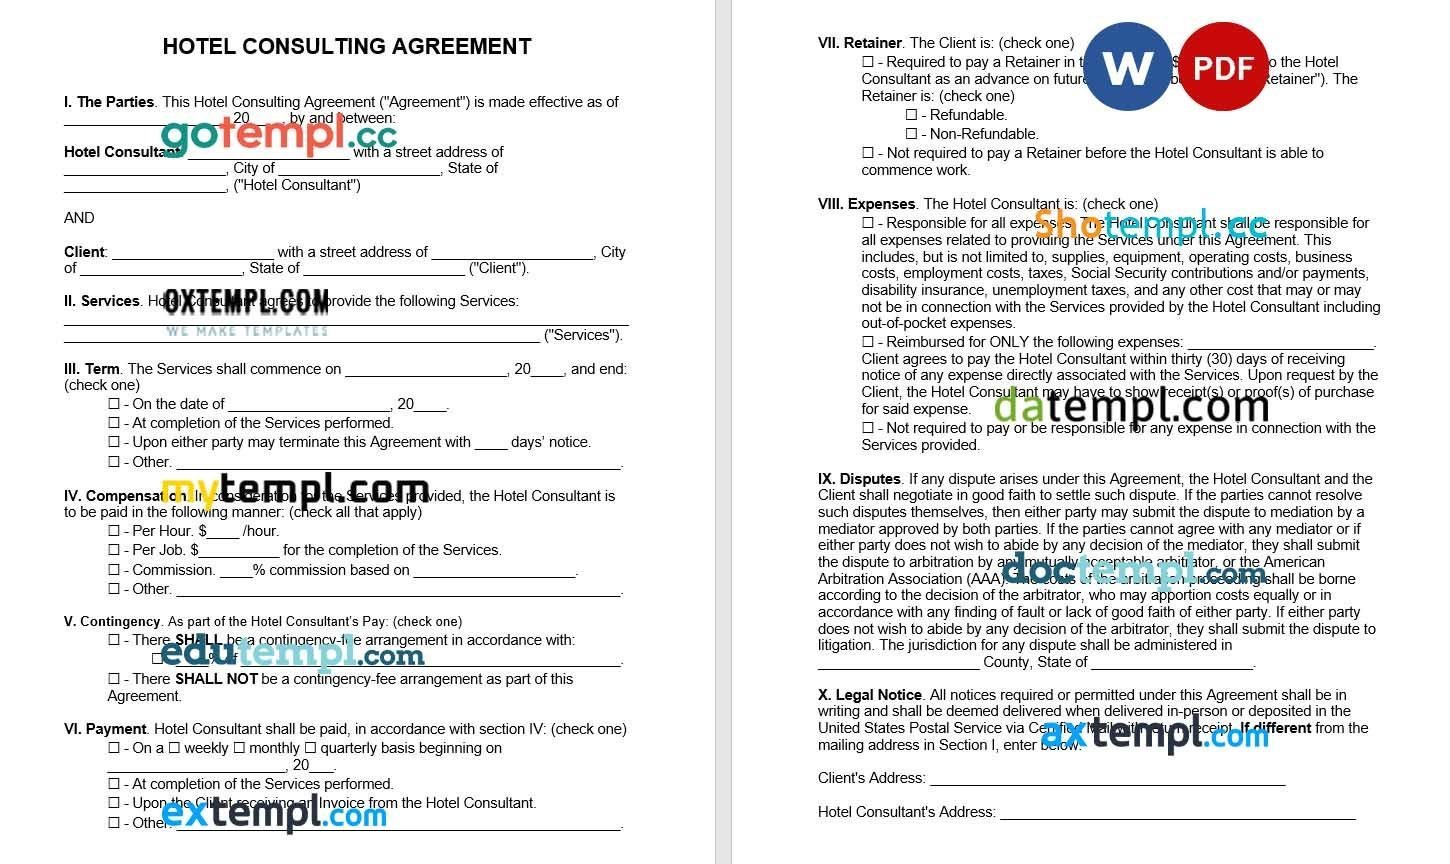 Hotel Consultant Agreement Word example, fully editable